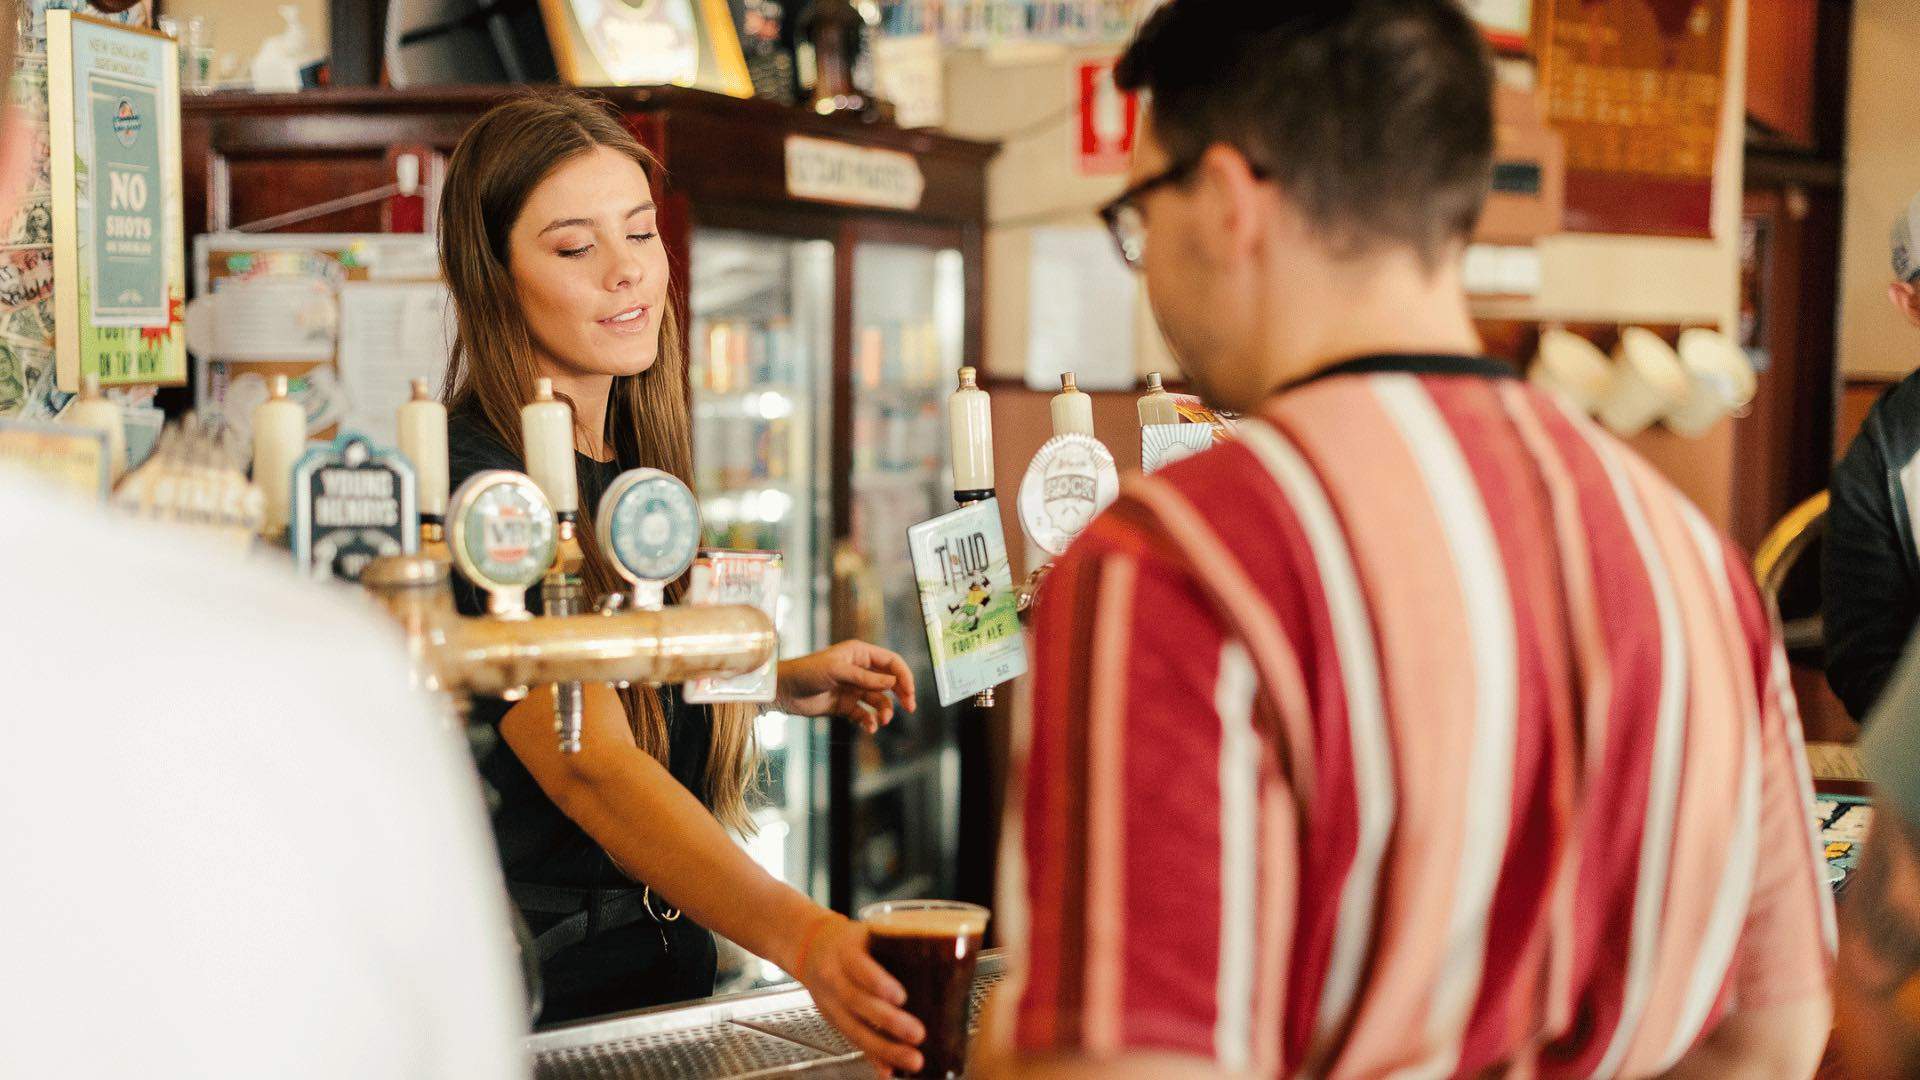 A staff member serving a person a beer at the bar.